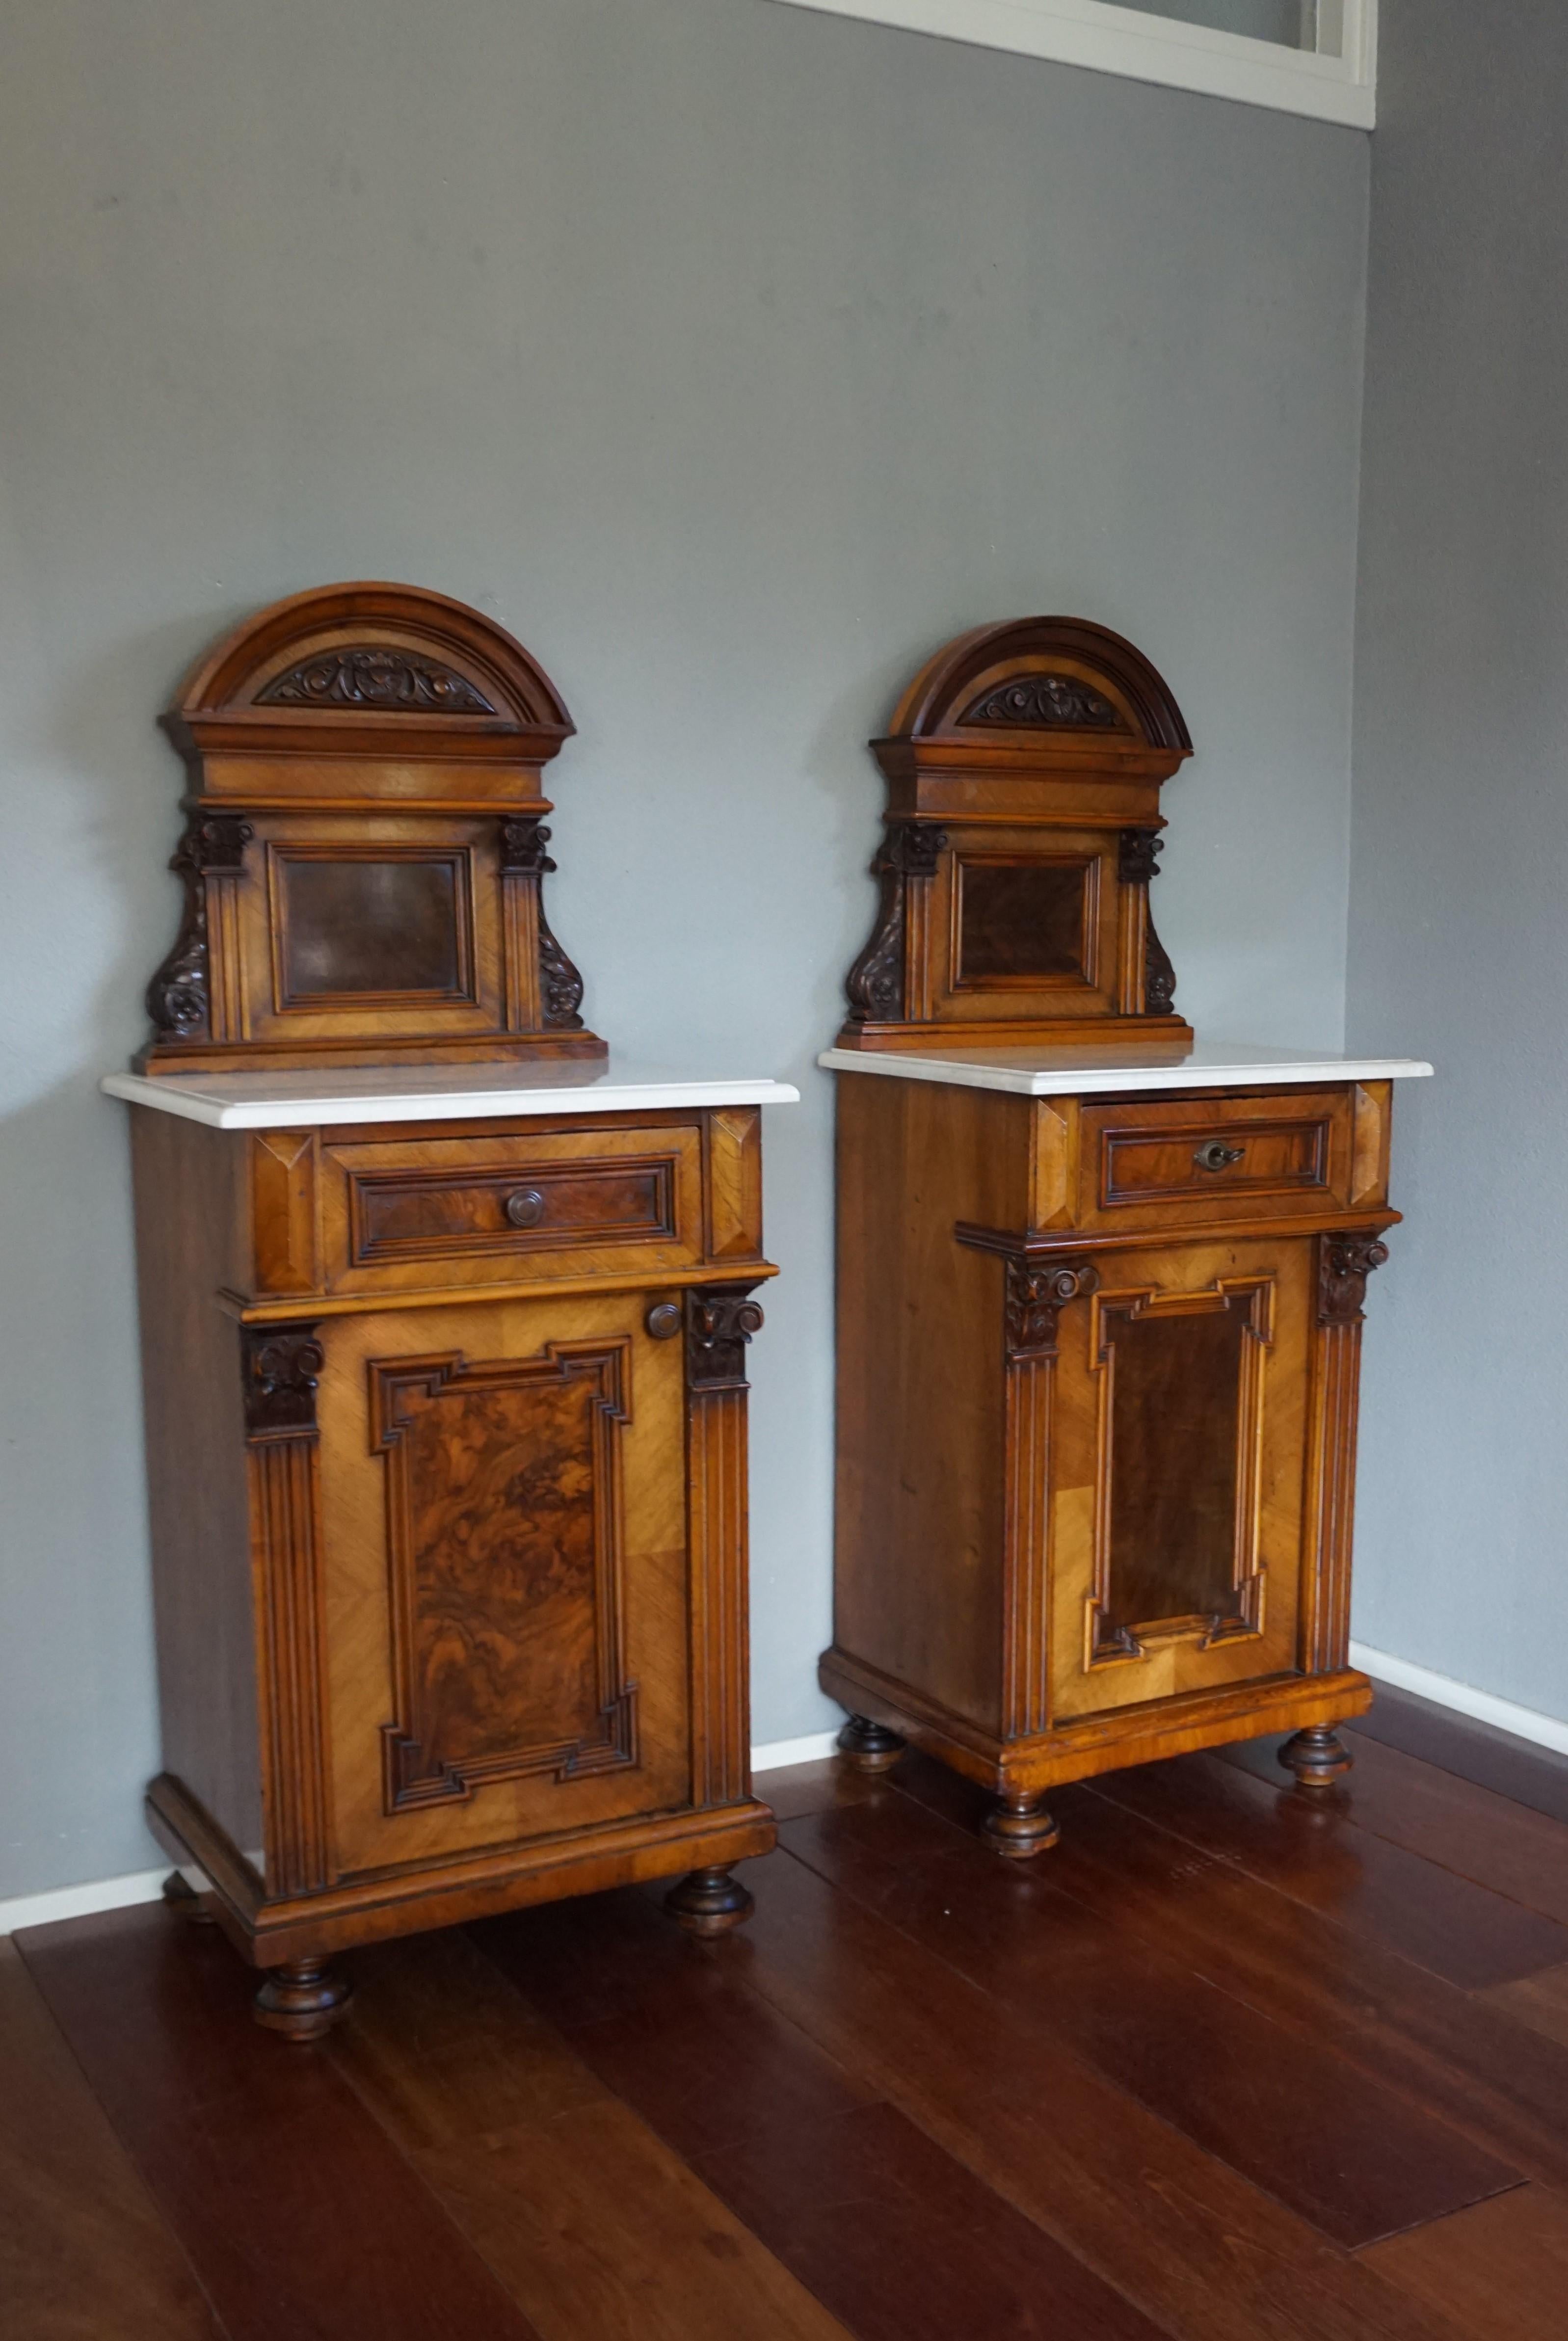 Handcrafted and perfectly hand carved nightstands from circa 1860.

If you are looking for a beautiful looking pair of practical night stands then this Victorian duo could grace your bedroom soon. Mind you, this is a real pair, because the doors